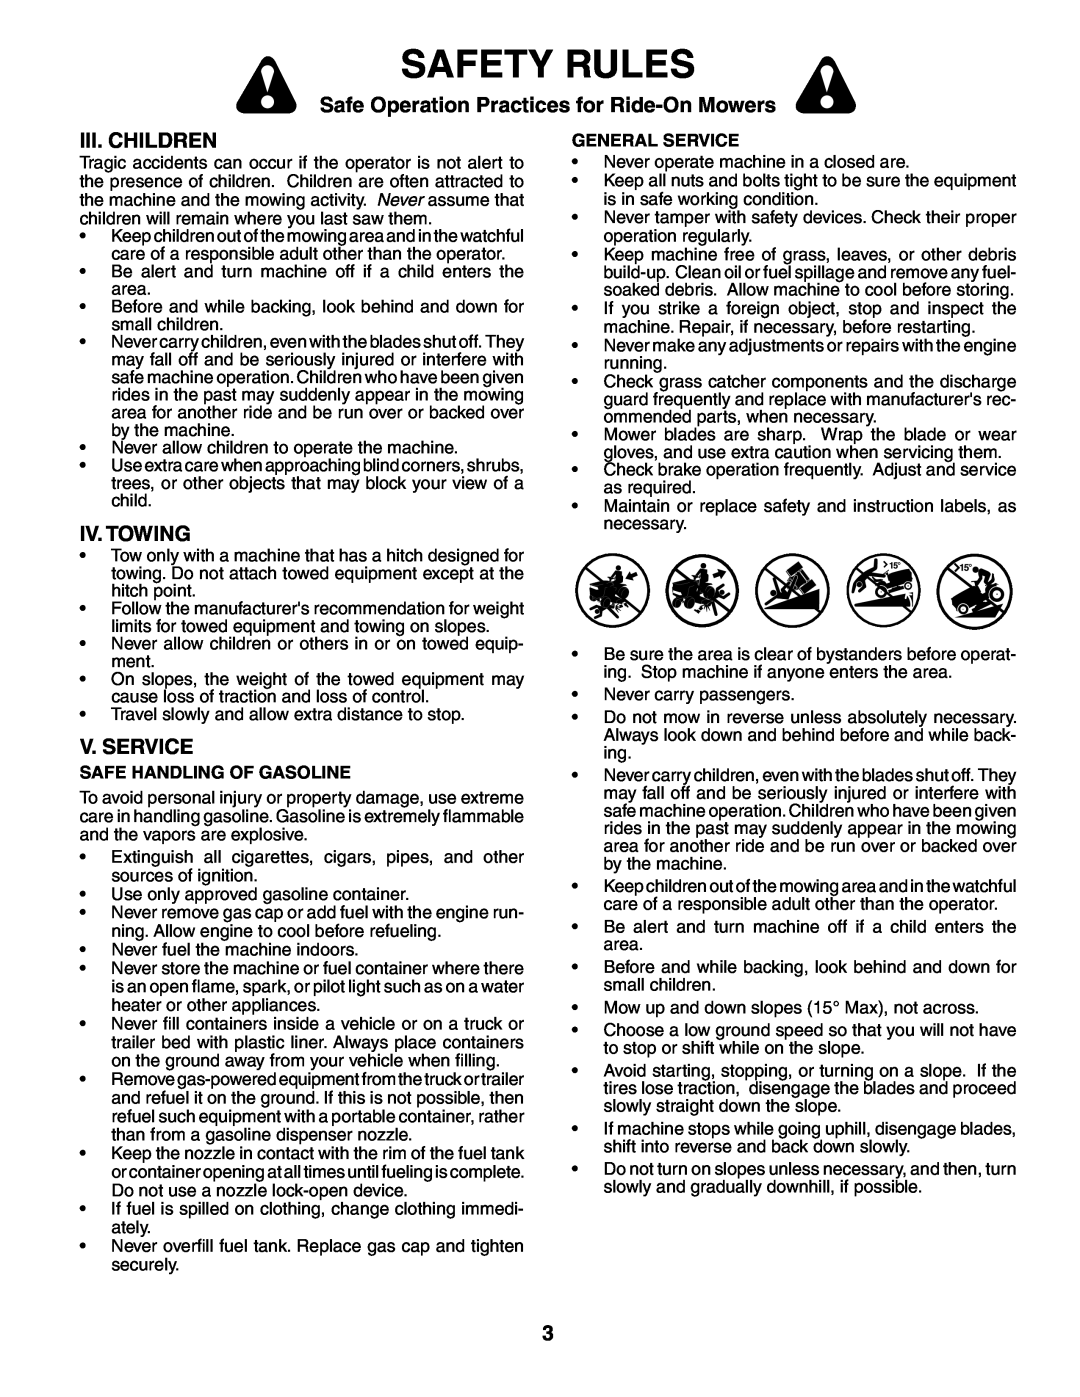 Poulan DB24H48YT manual Iii. Children, Iv. Towing, V. Service, Safety Rules, Safe Operation Practices for Ride-On Mowers 